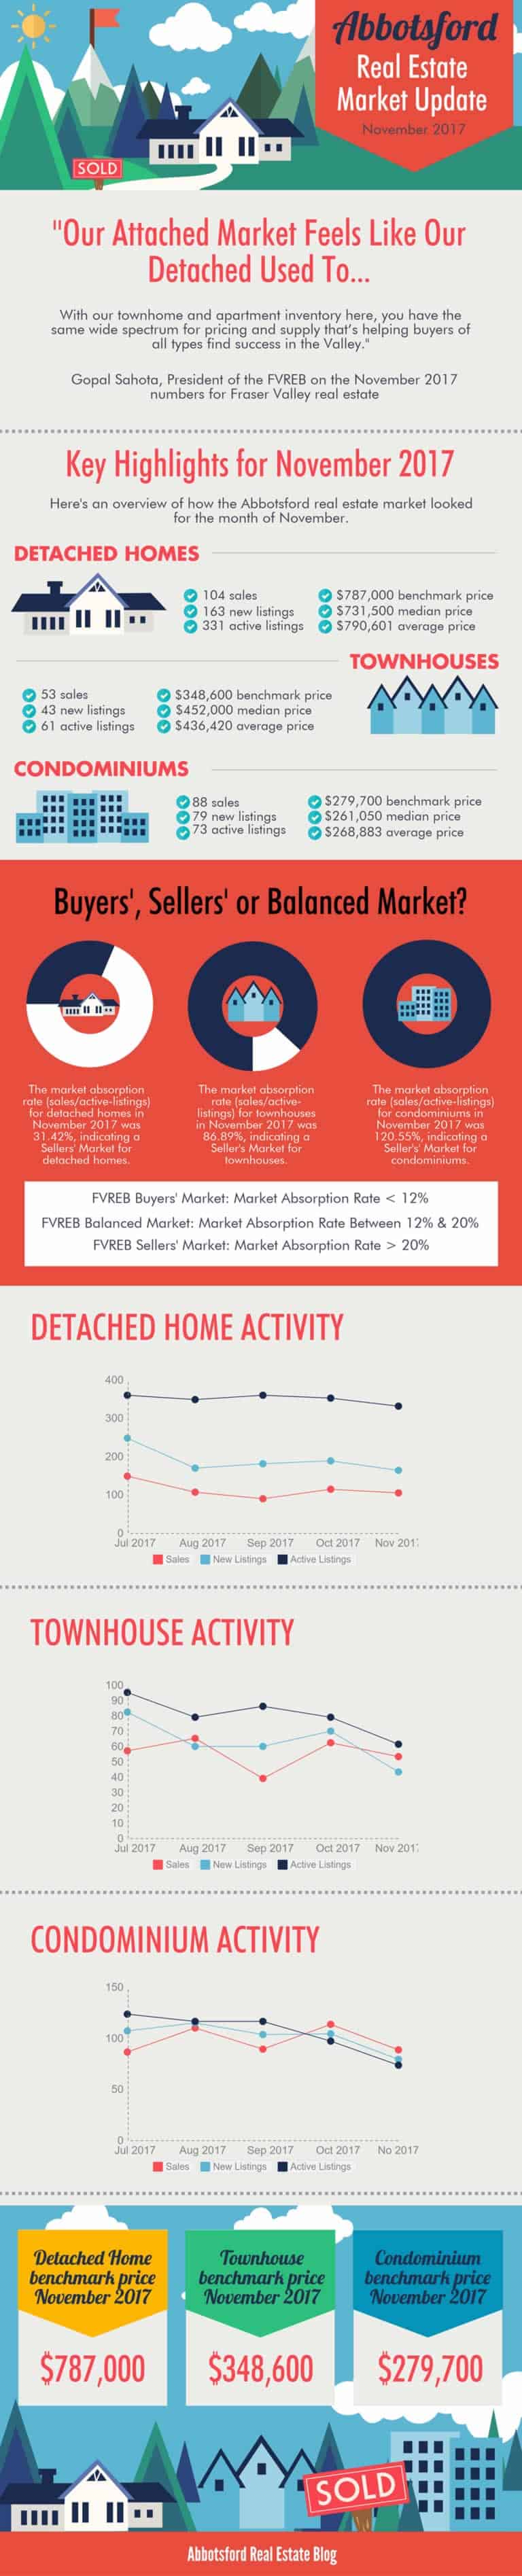 Abbotsford Detached Home Market Update November 2017 Infographic